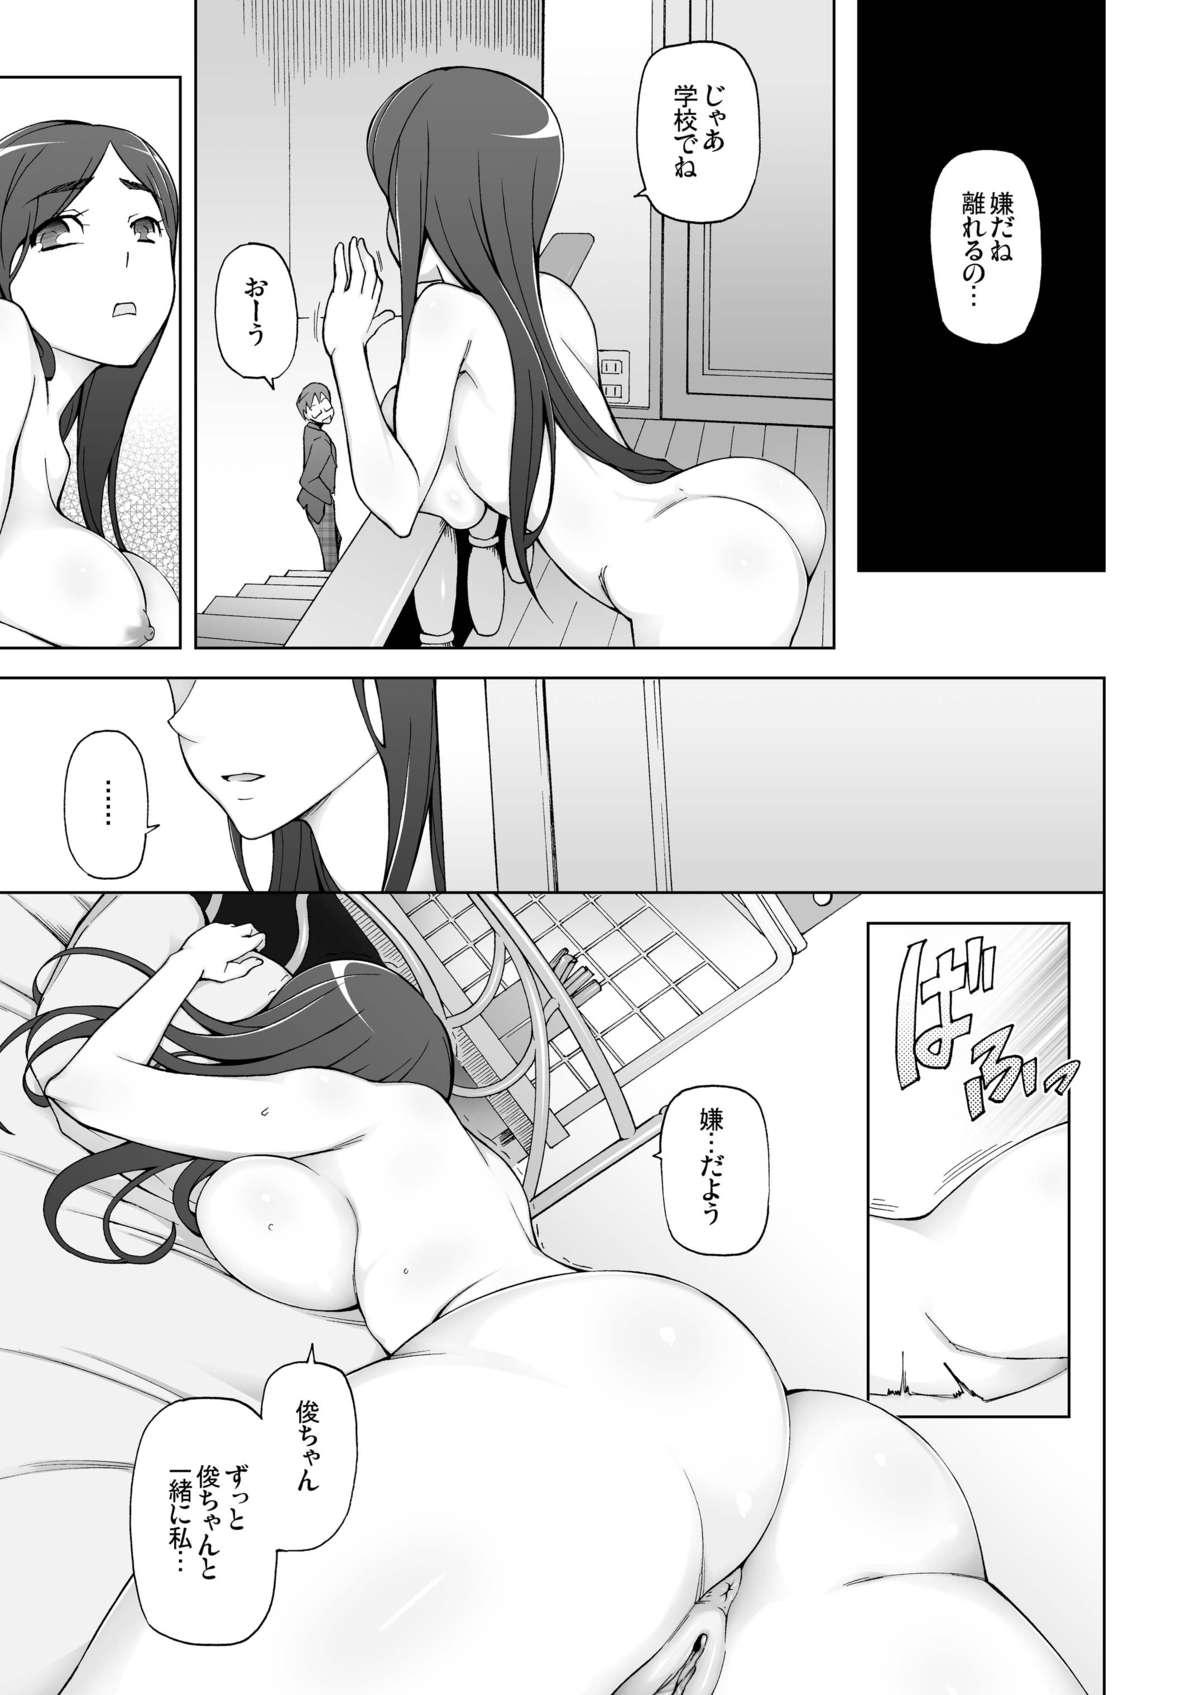 Long Hair LUSTFUL BERRY escalate0.5 8teenxxx - Page 3